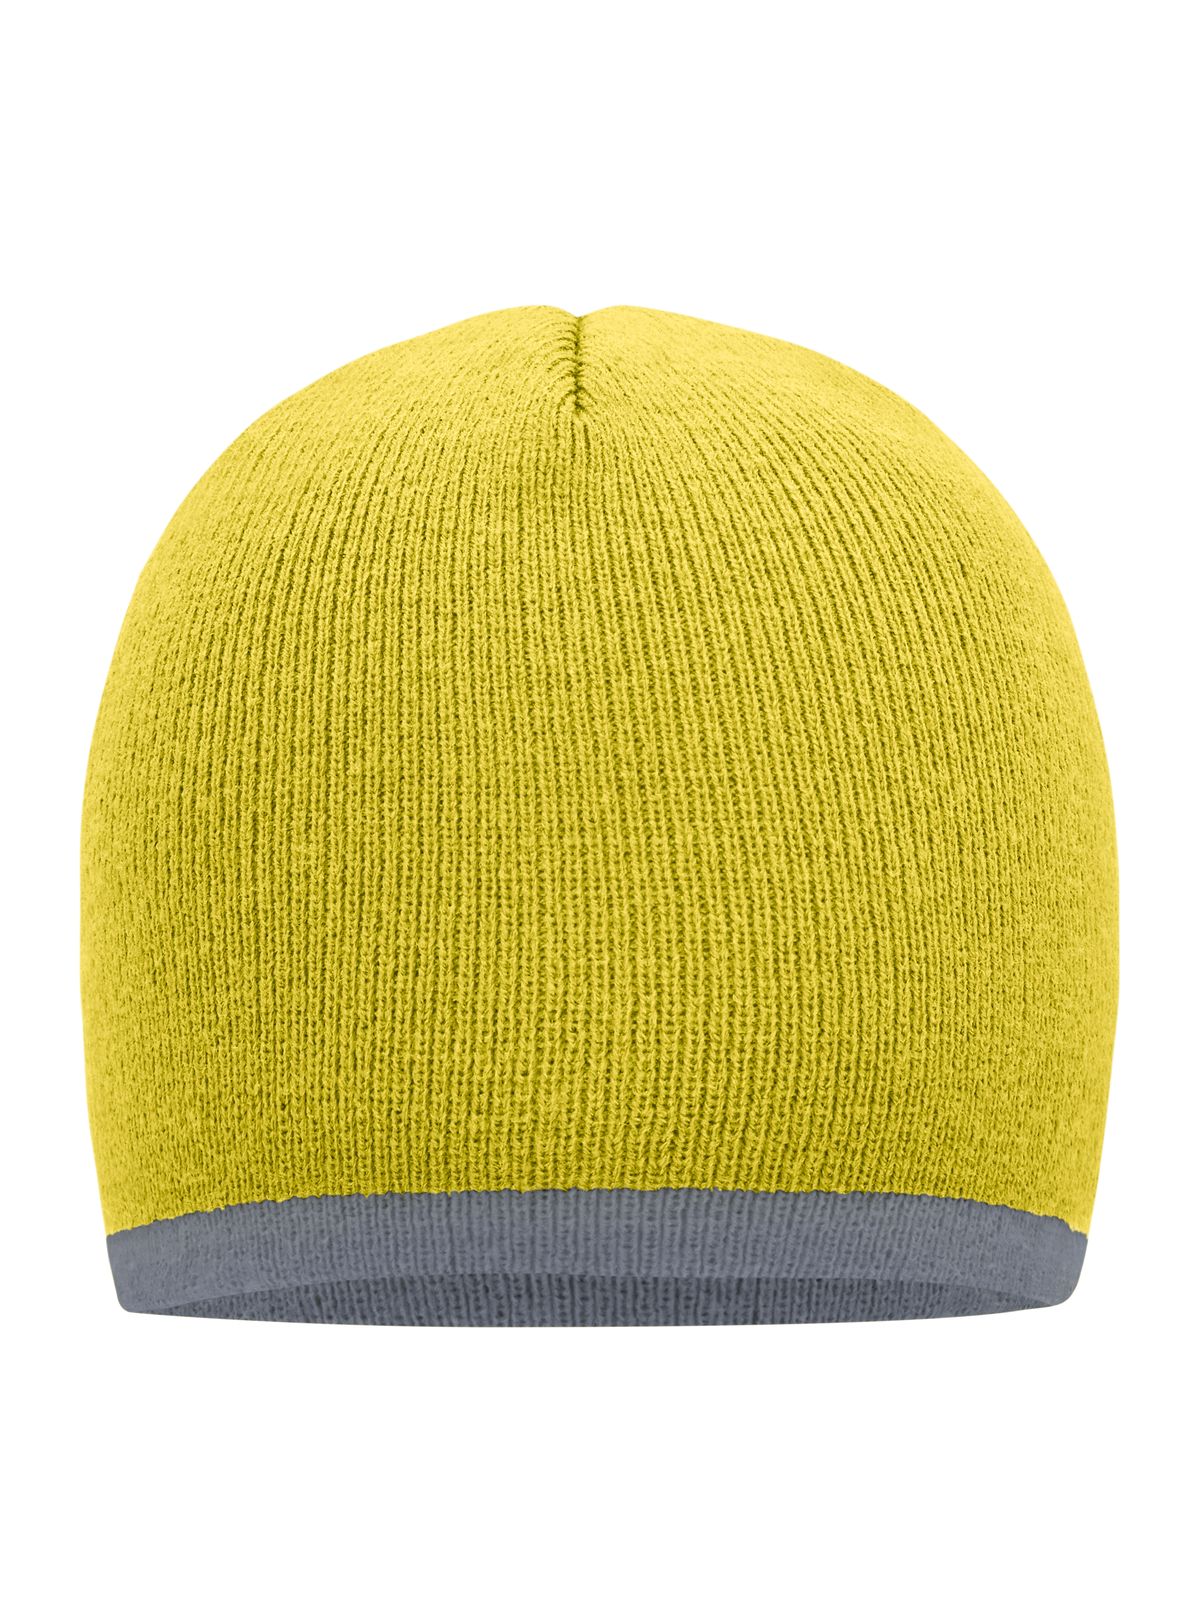 beanie-with-contrasting-border-yellow-light-grey.webp